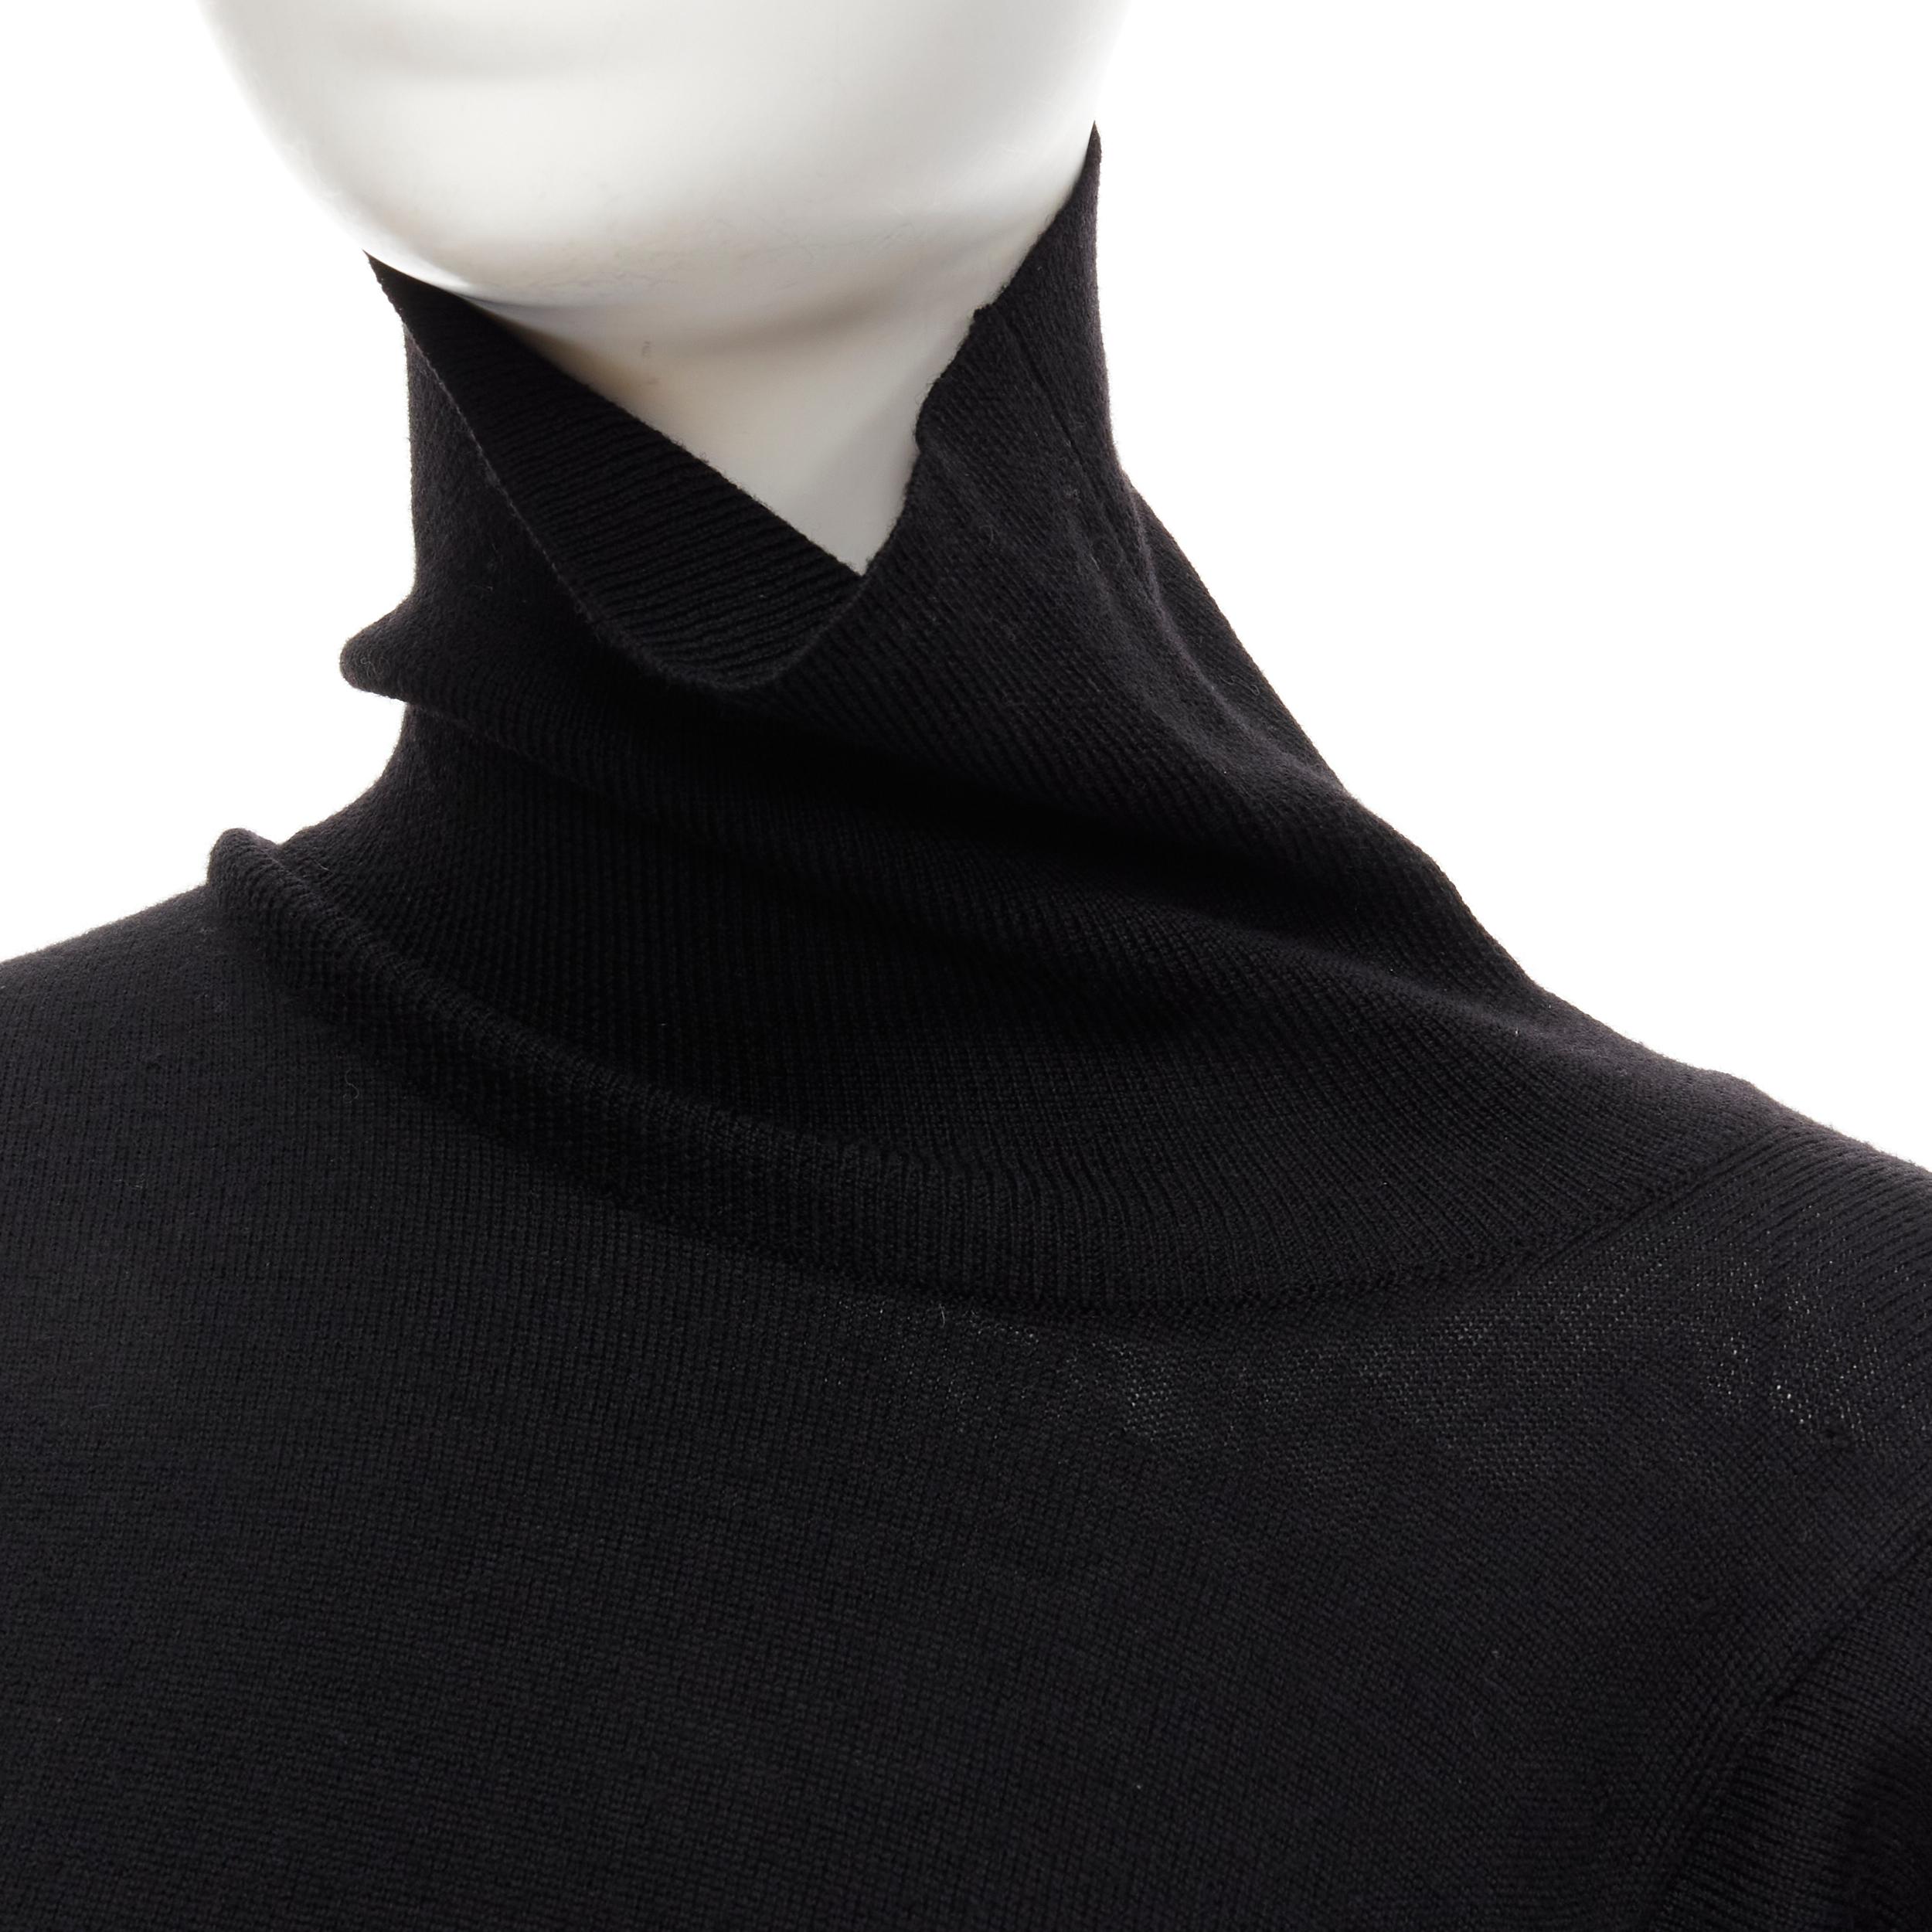 vintage MAISON MARGIELA black wool asymmetric cut pulled turtleneck sweater M 
Reference: LNKO/A01866 
Brand: Maison Margiela 
Material: Wool 
Color: Black 
Pattern: Solid 
Extra Detail: Asymmetric cut to look like the turtleneck is pulled to one